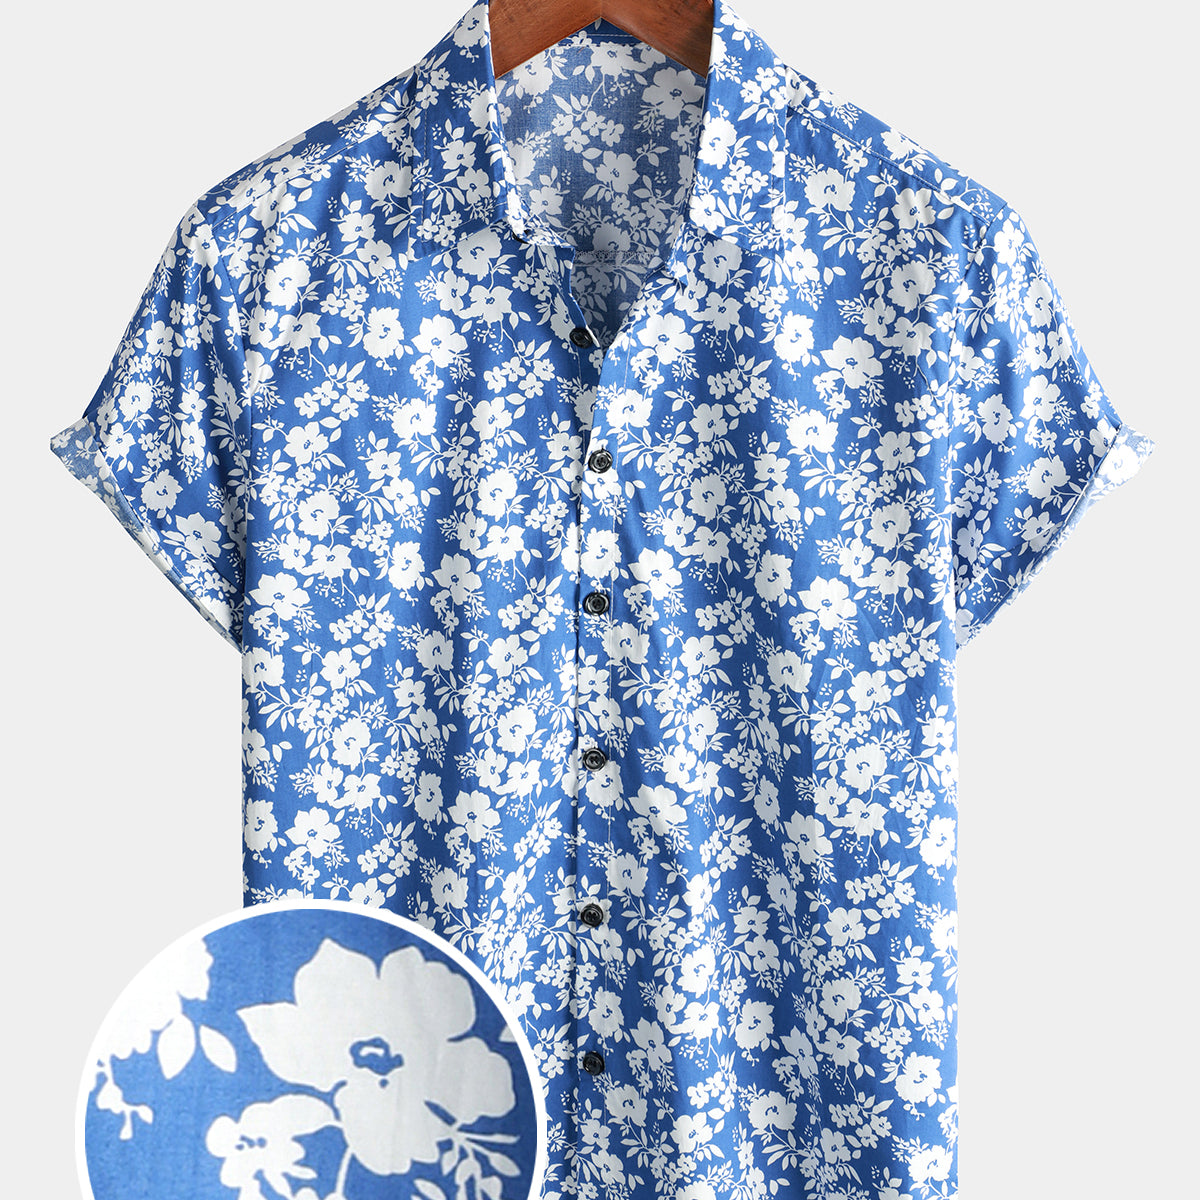 Men's Floral Cotton Holiday Flower Print Summer Button Up Breathable Blue Short Sleeve Shirt